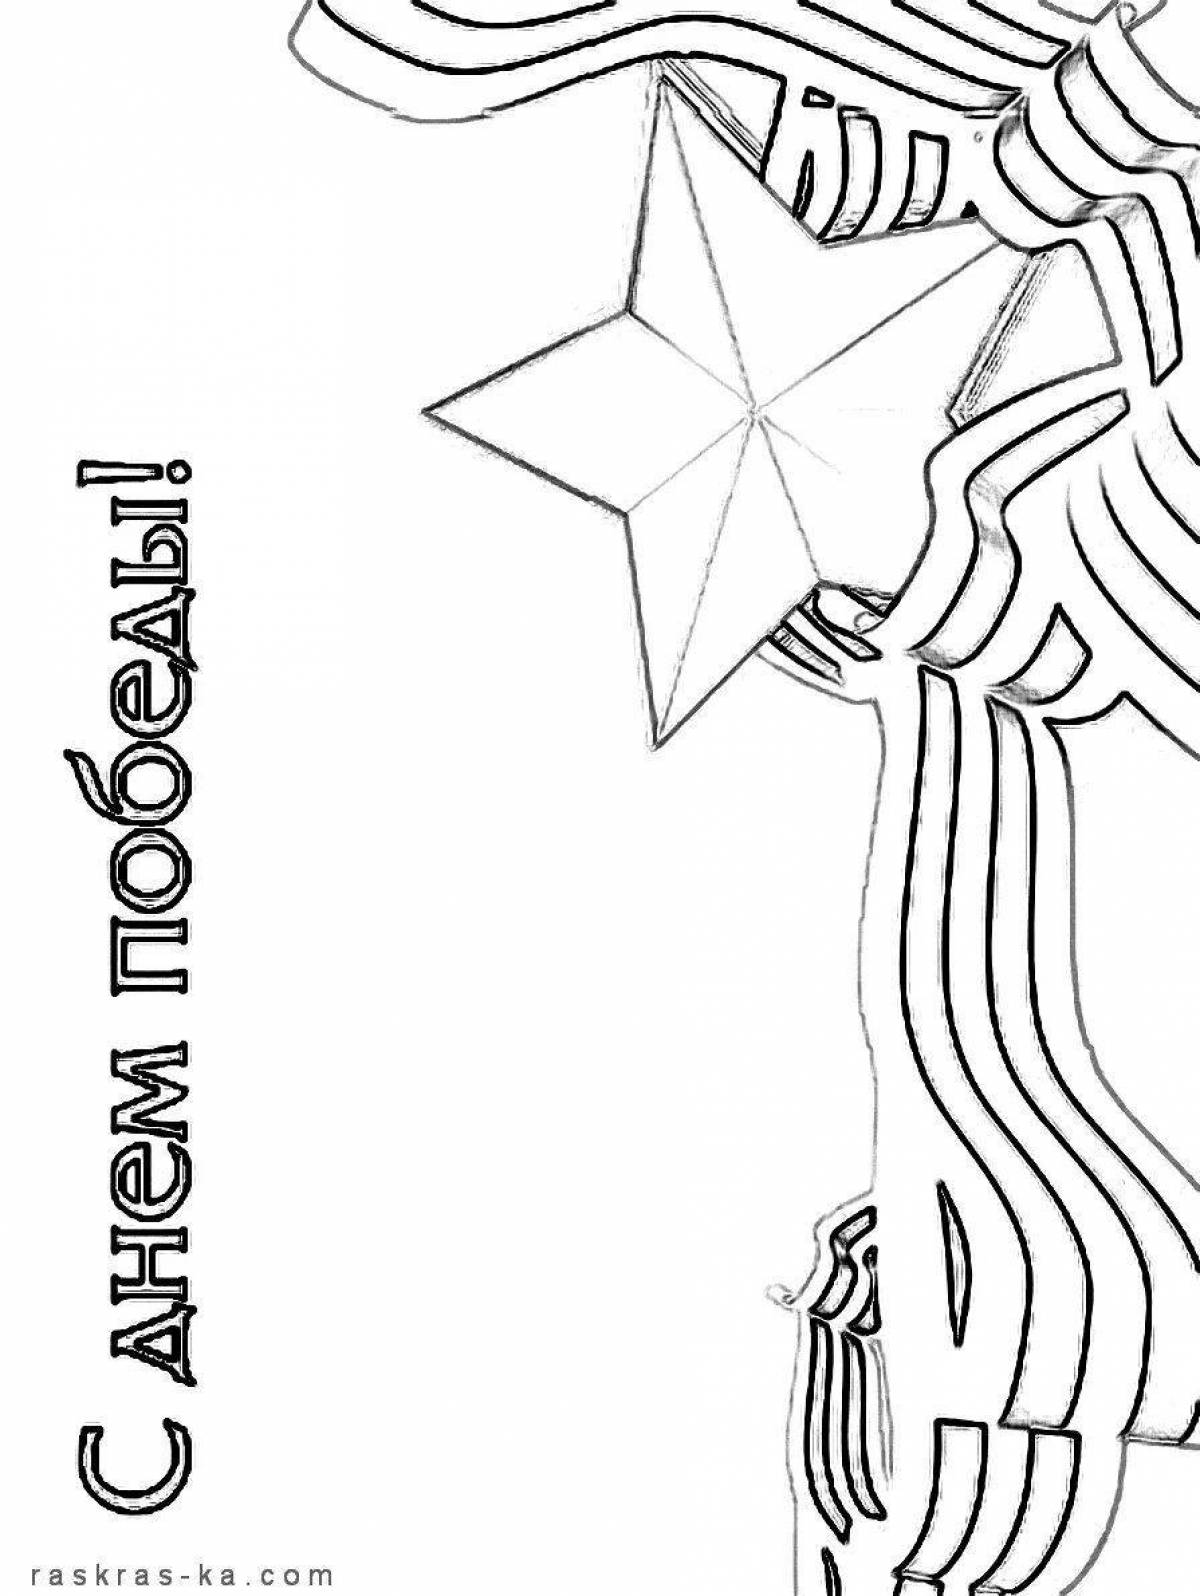 Coloring book dazzling star and St. George ribbon